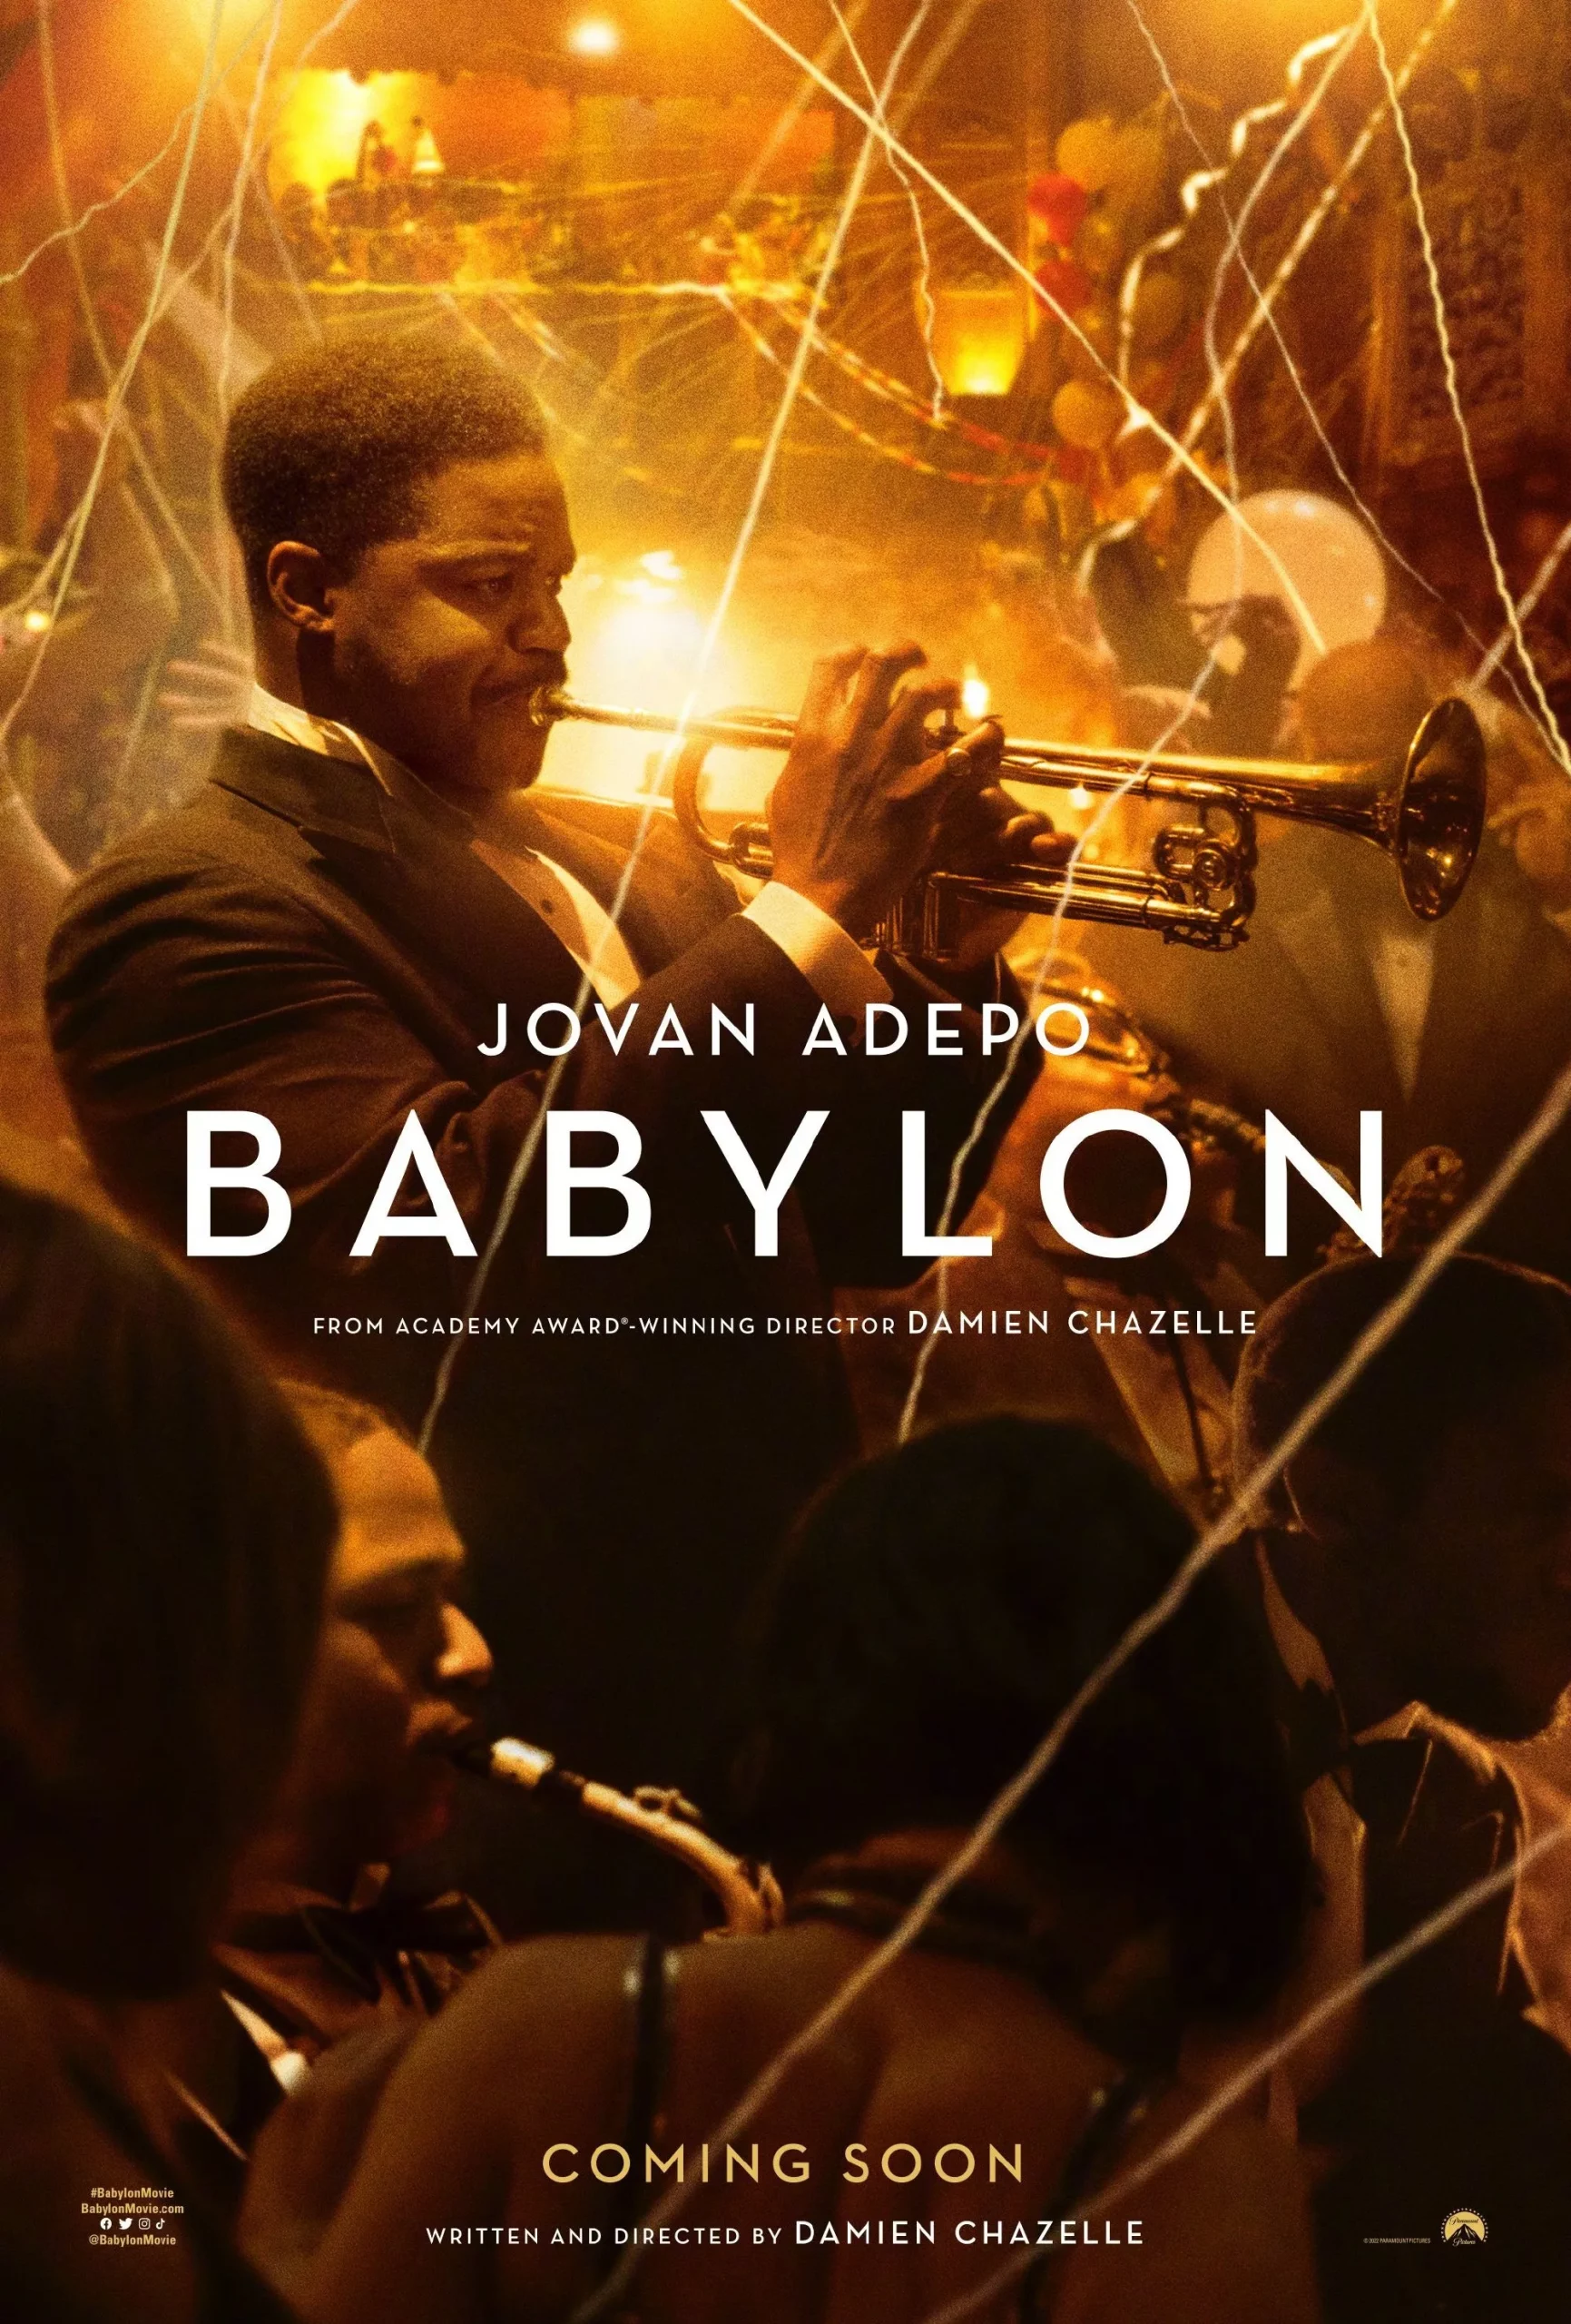 damien-chazelles-new-film-babylon-releases-character-posters-5